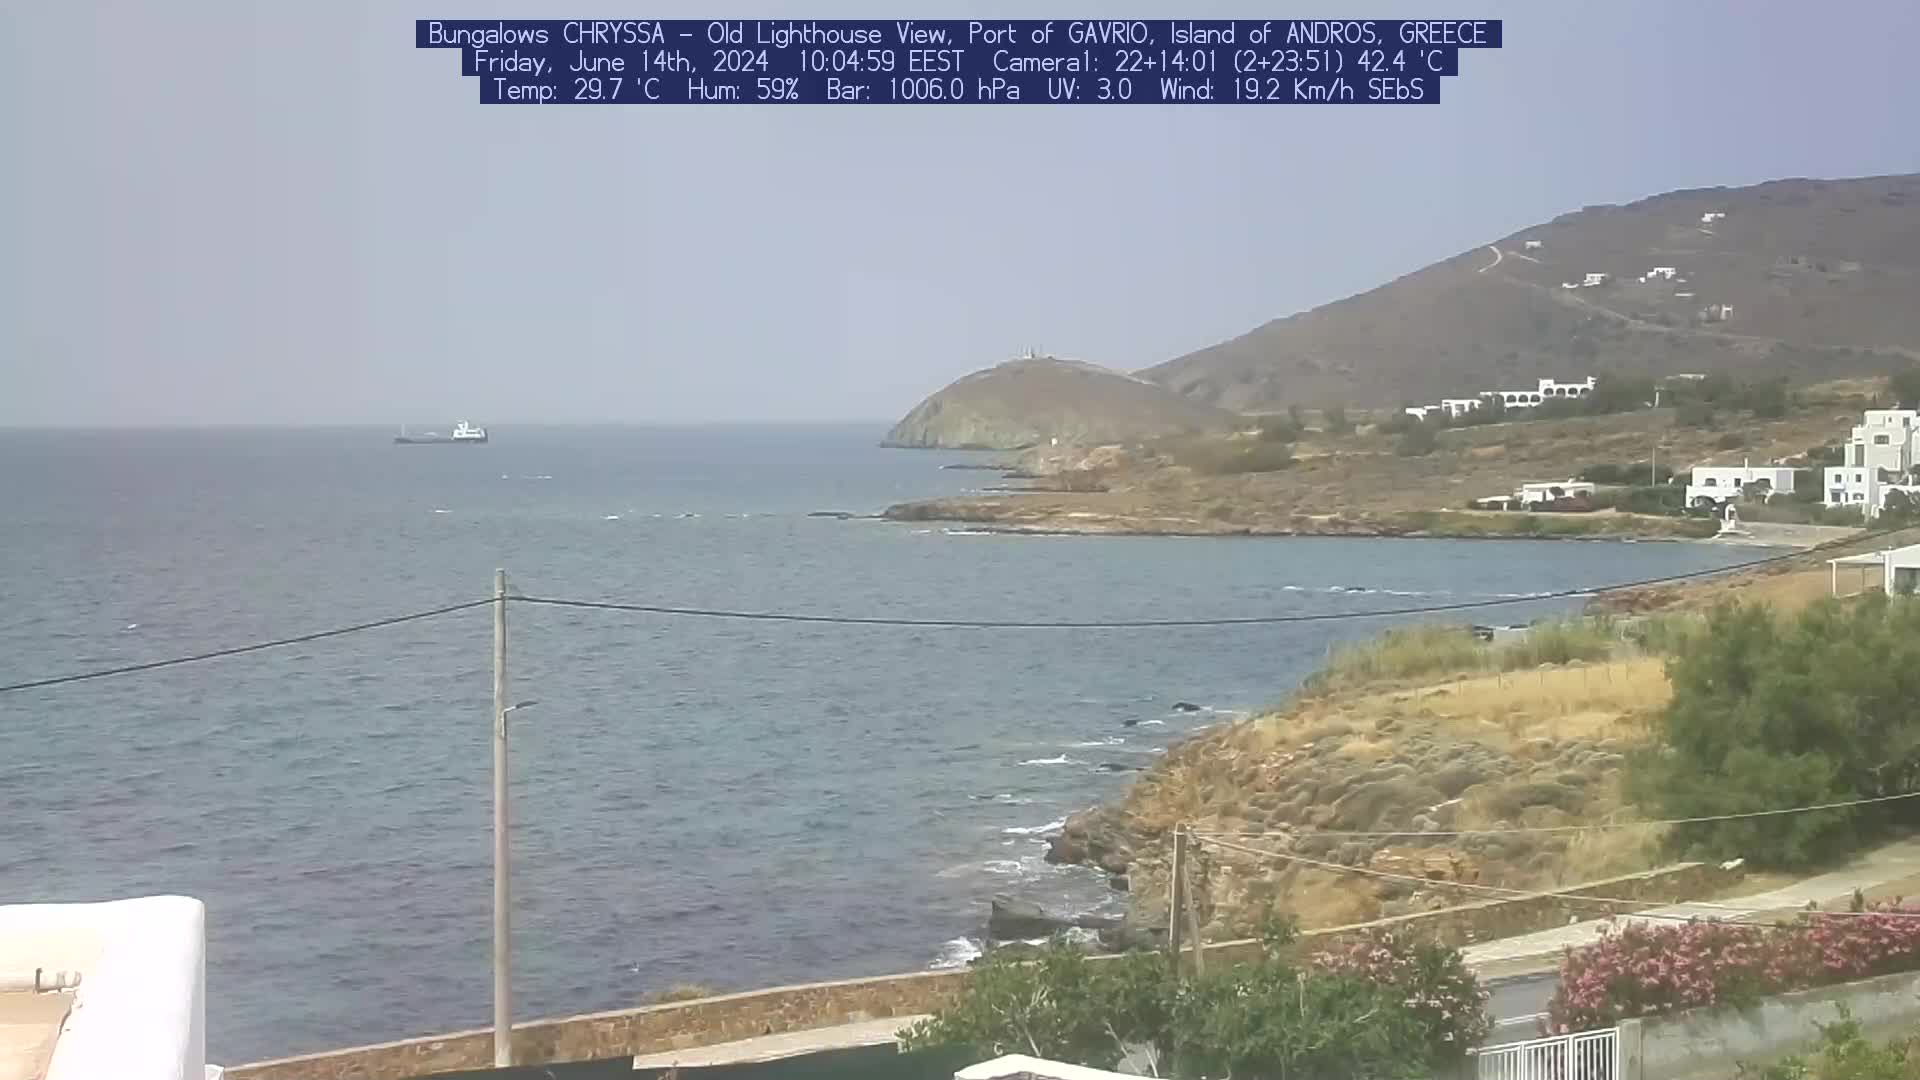 Andros - Gavrion Mar. 10:05